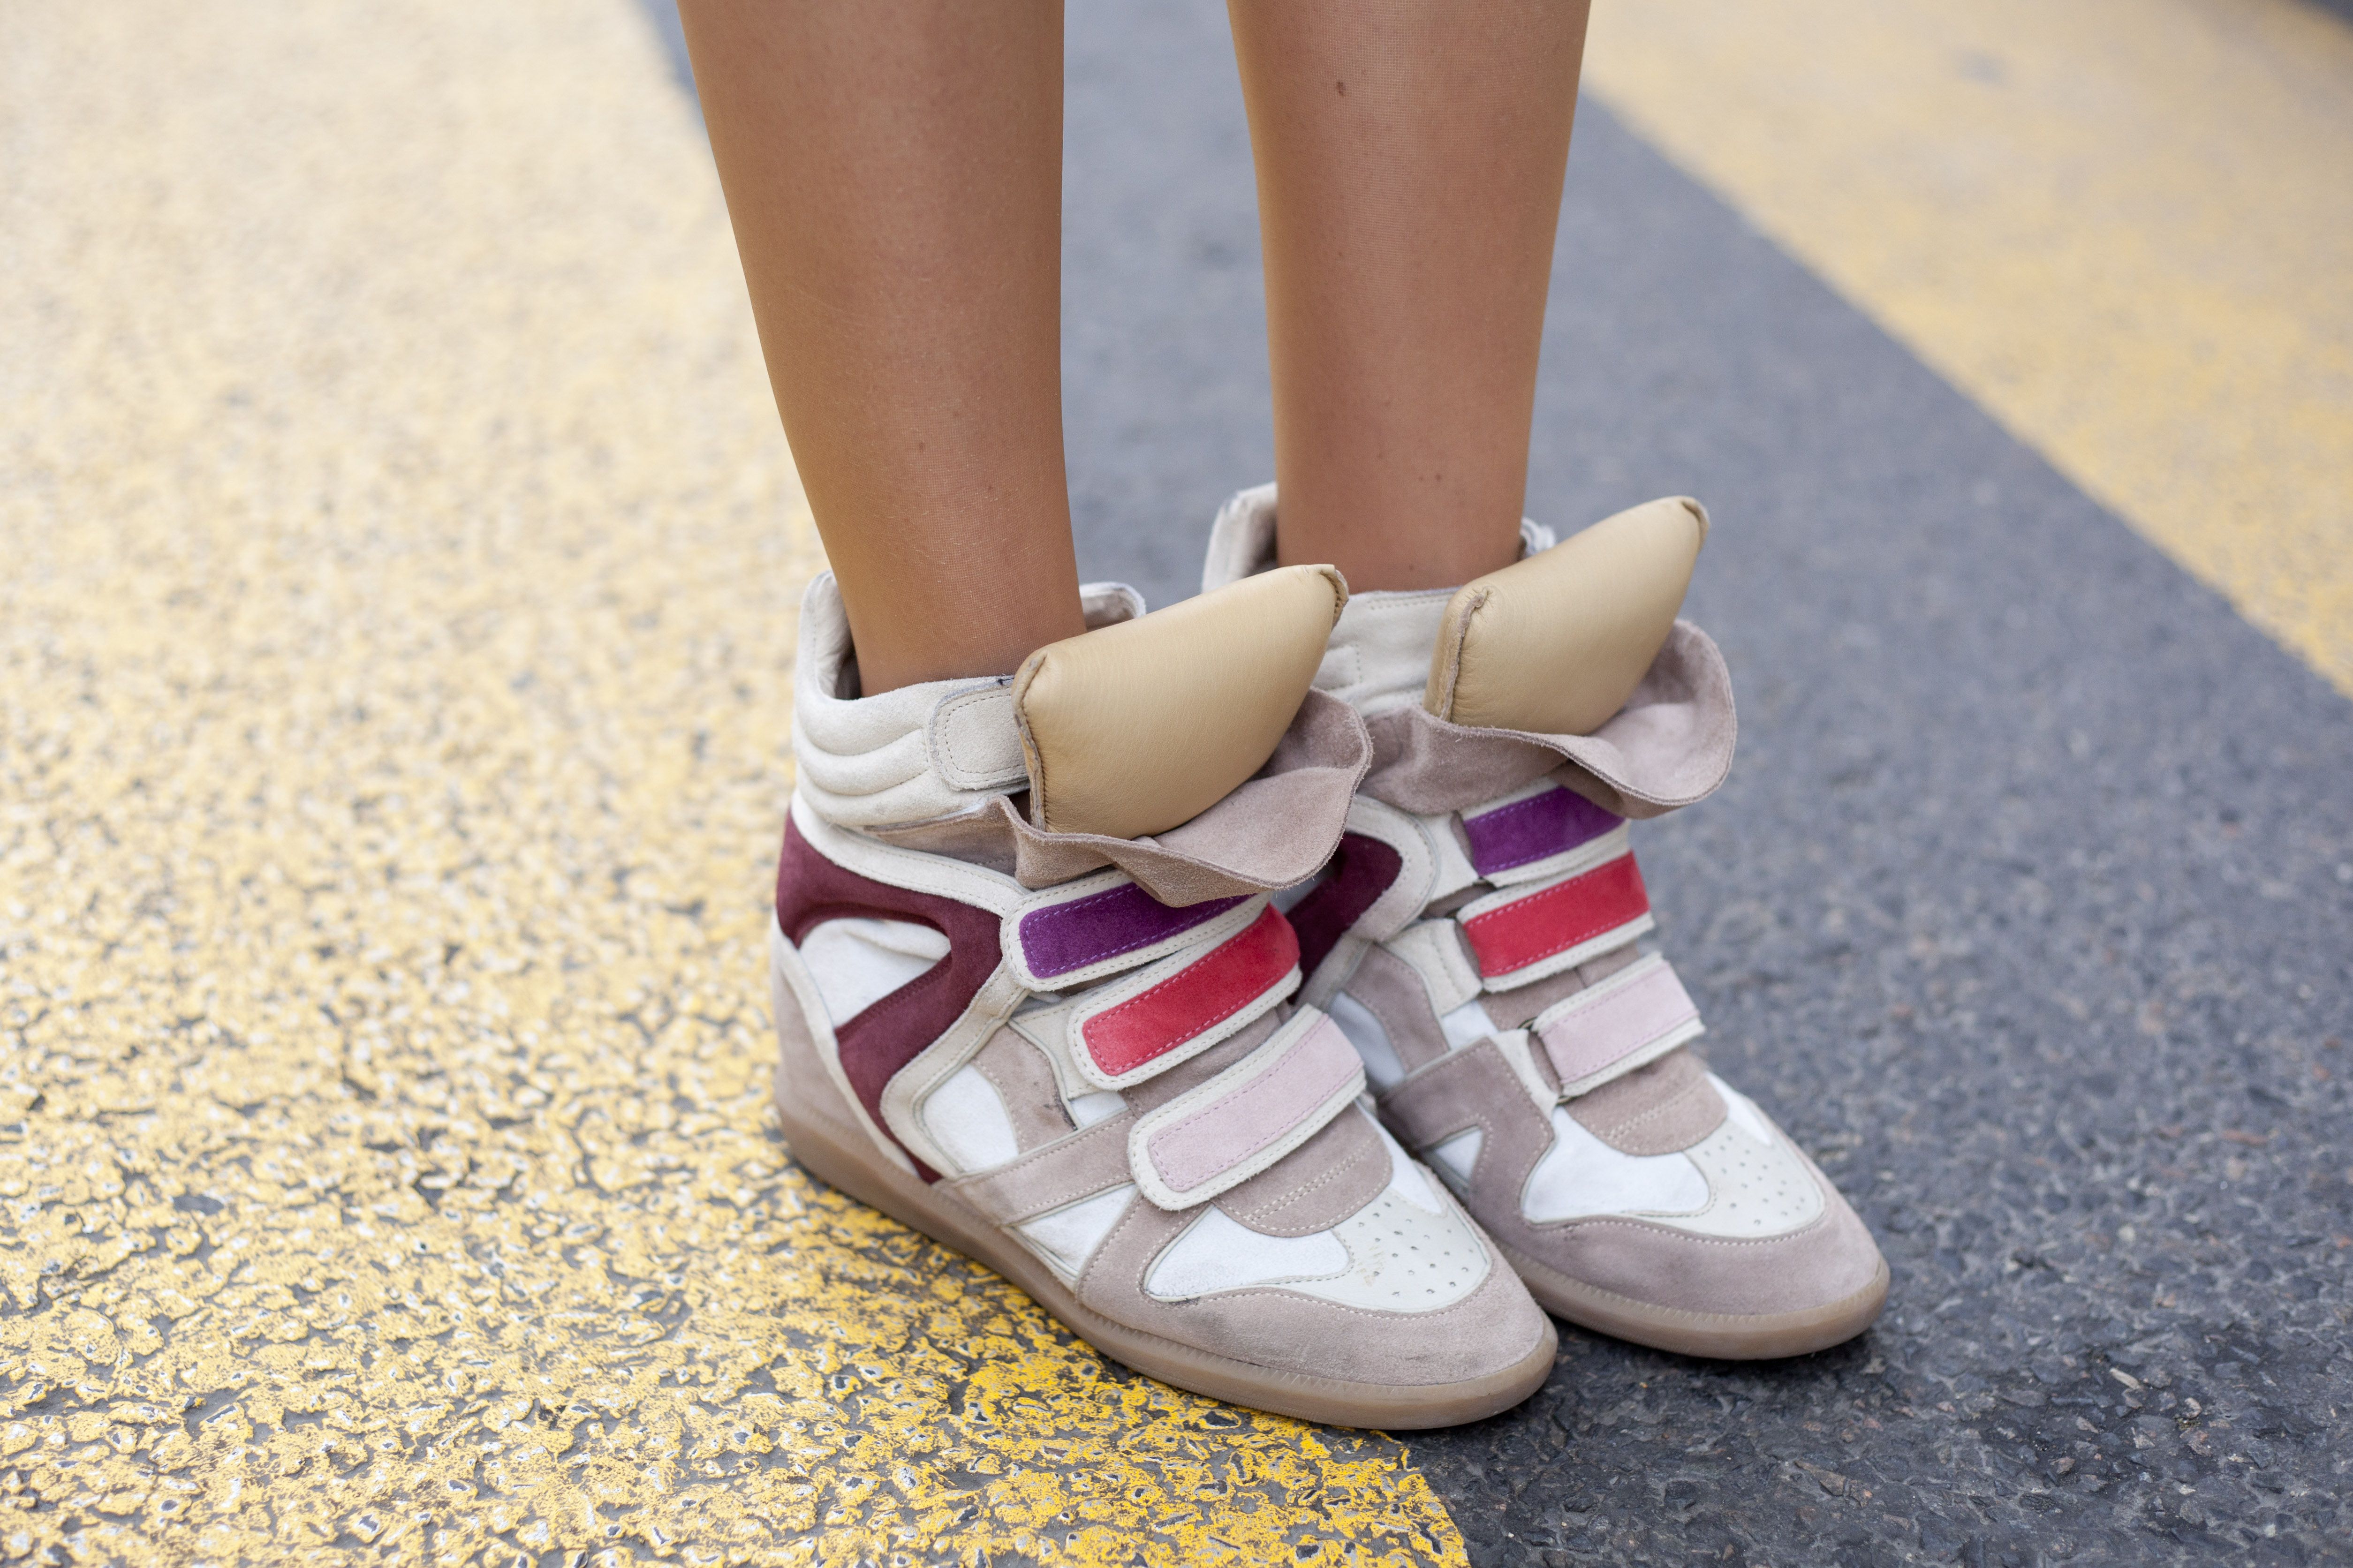 Isabel Marant has relaunched her iconic wedge sneaker